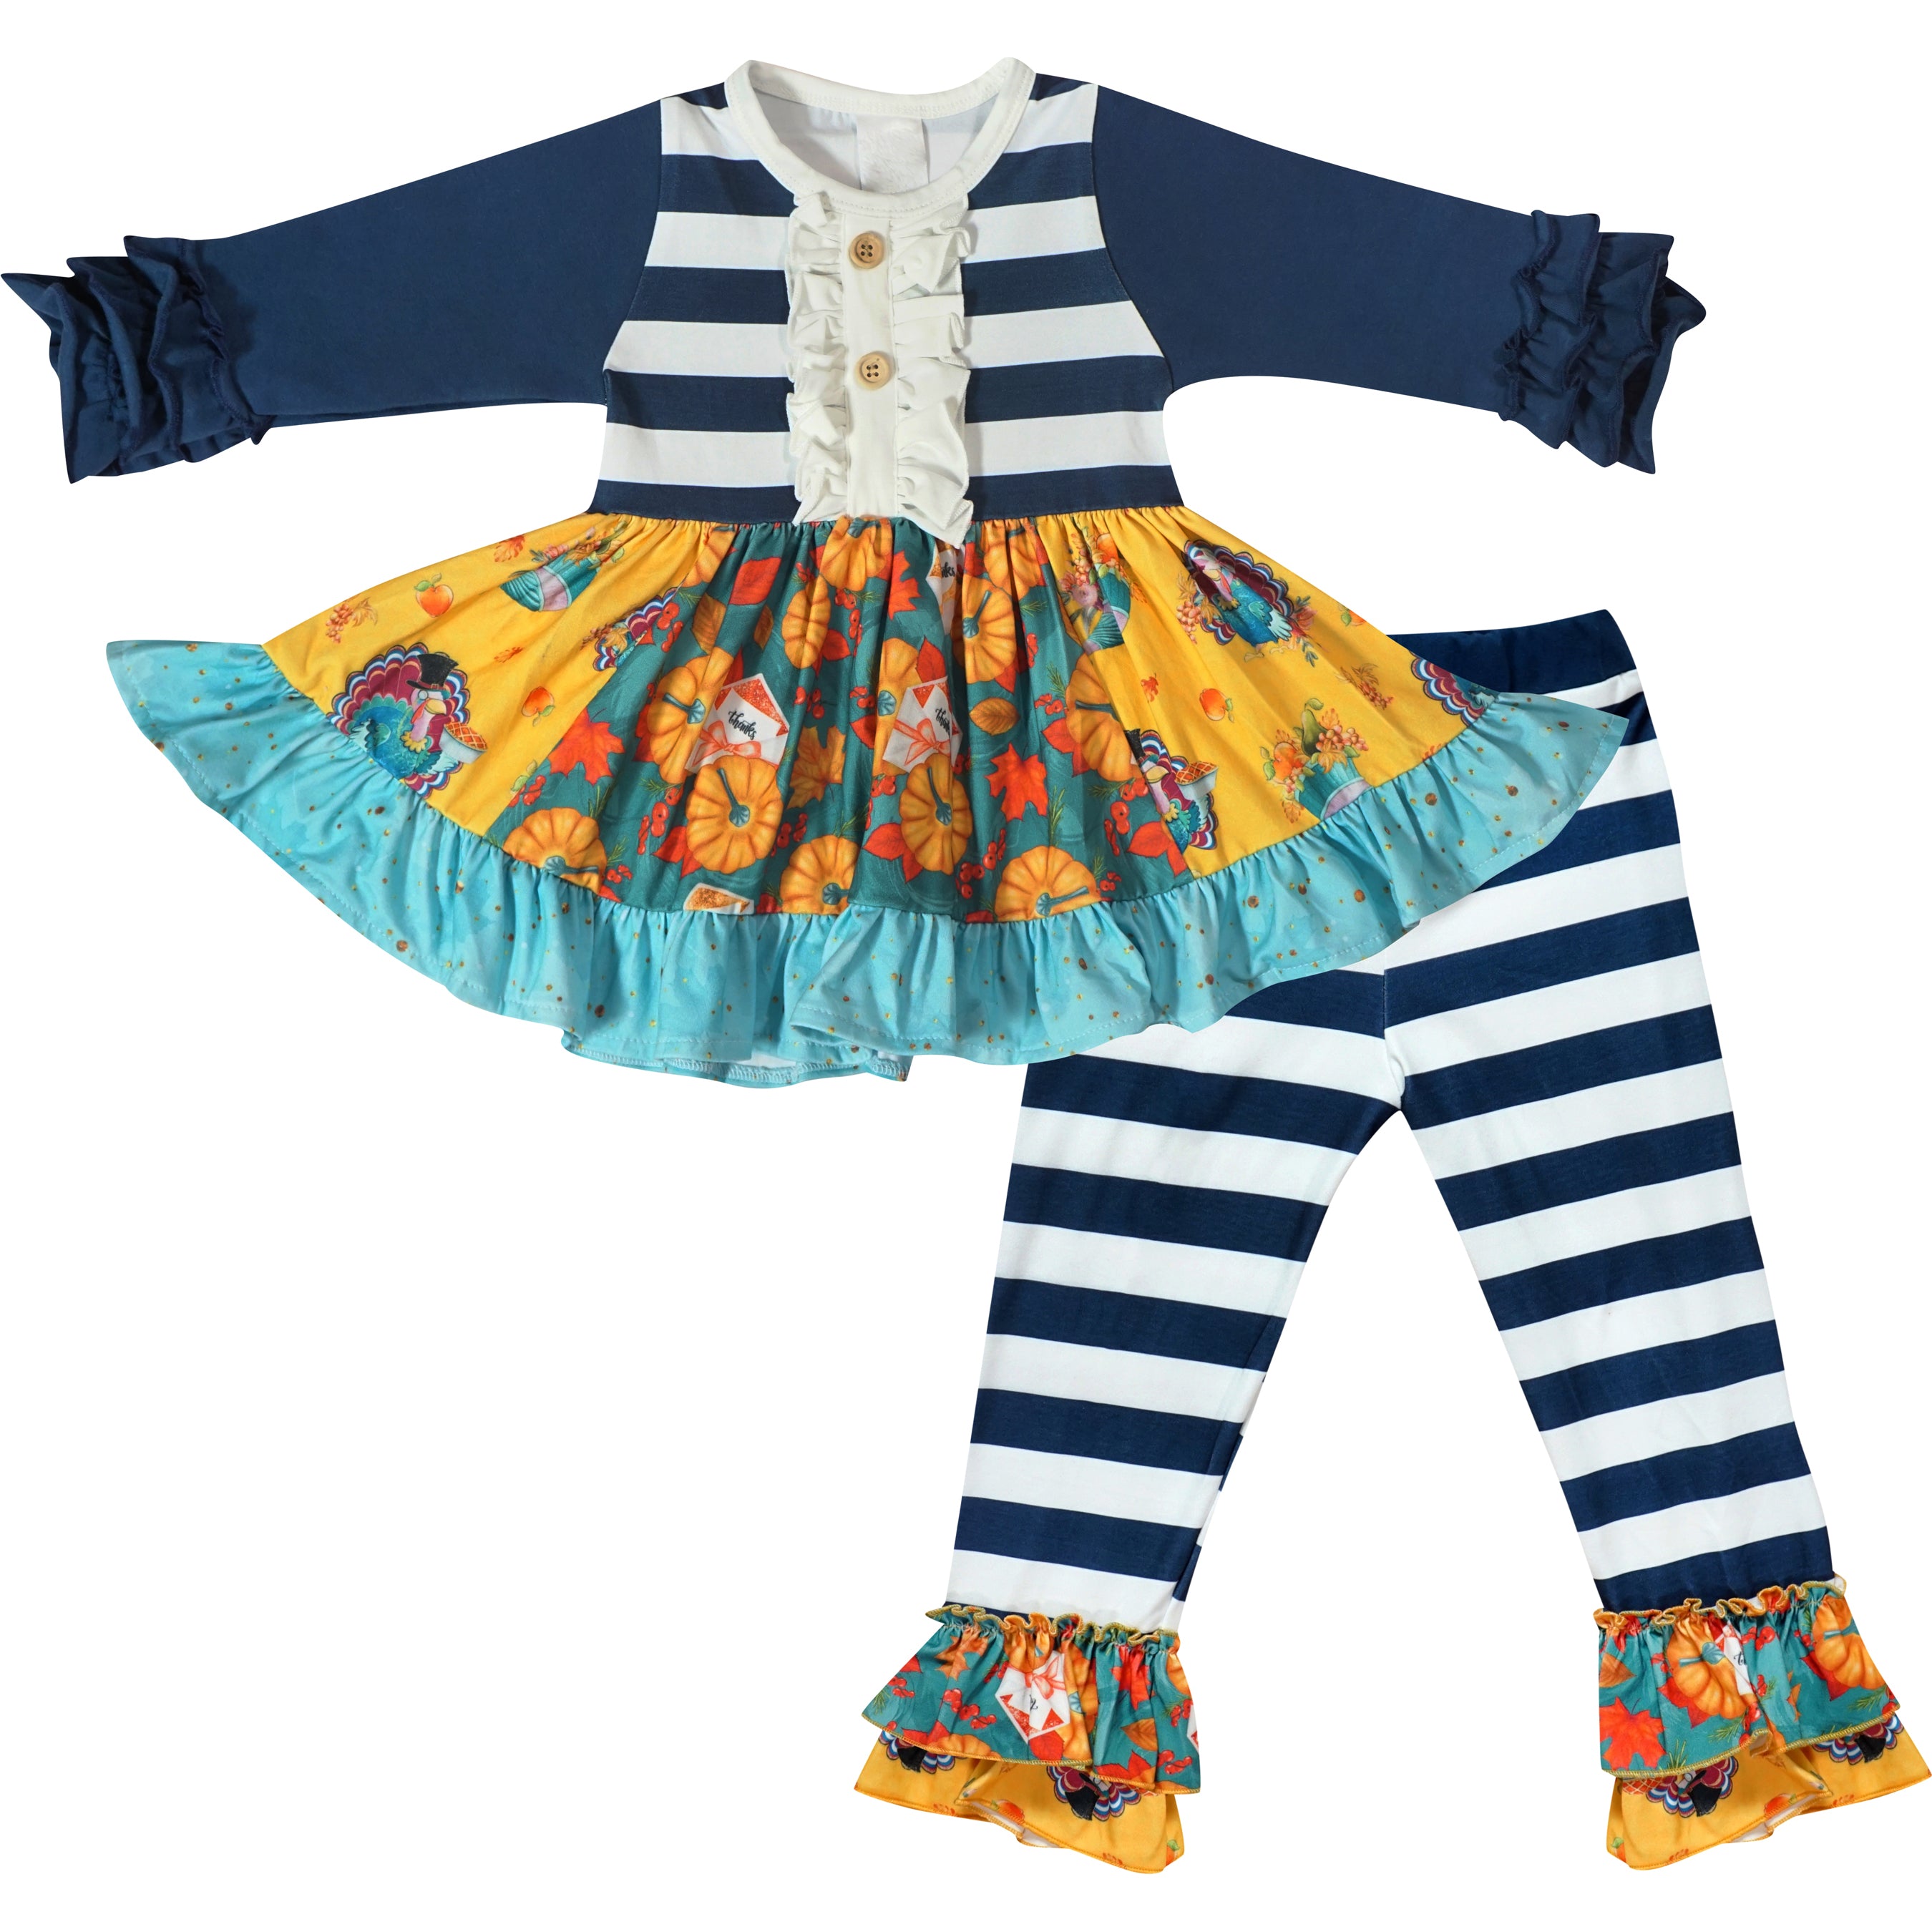 Baby Toddler Little Girls Thanksgiving Turkey Ruffle Panel Top & Pants Outfit Set - Navy Stripes - Angeline Kids